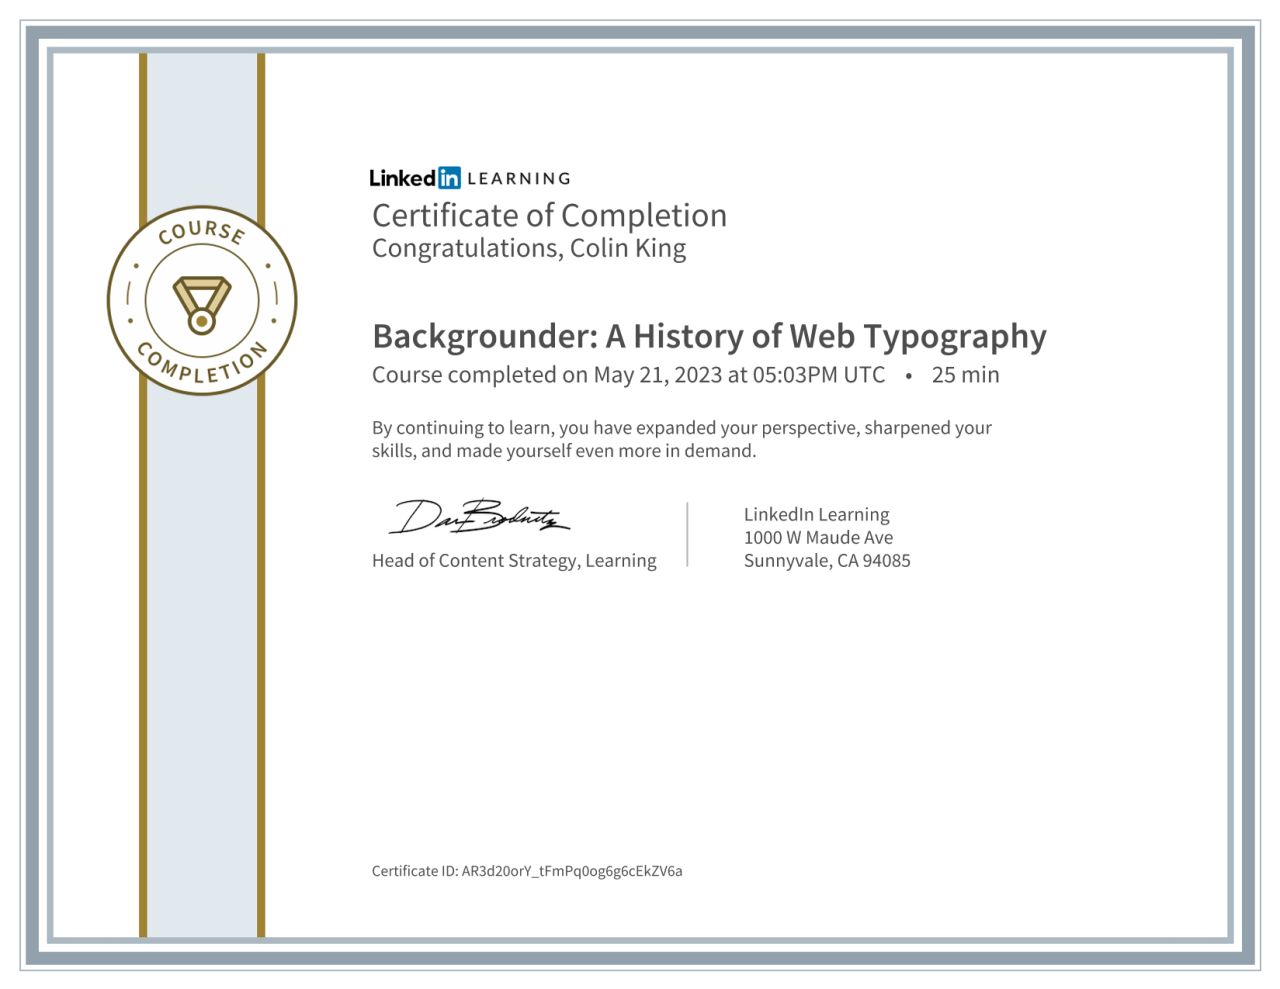 A History of Web Typography Certificate